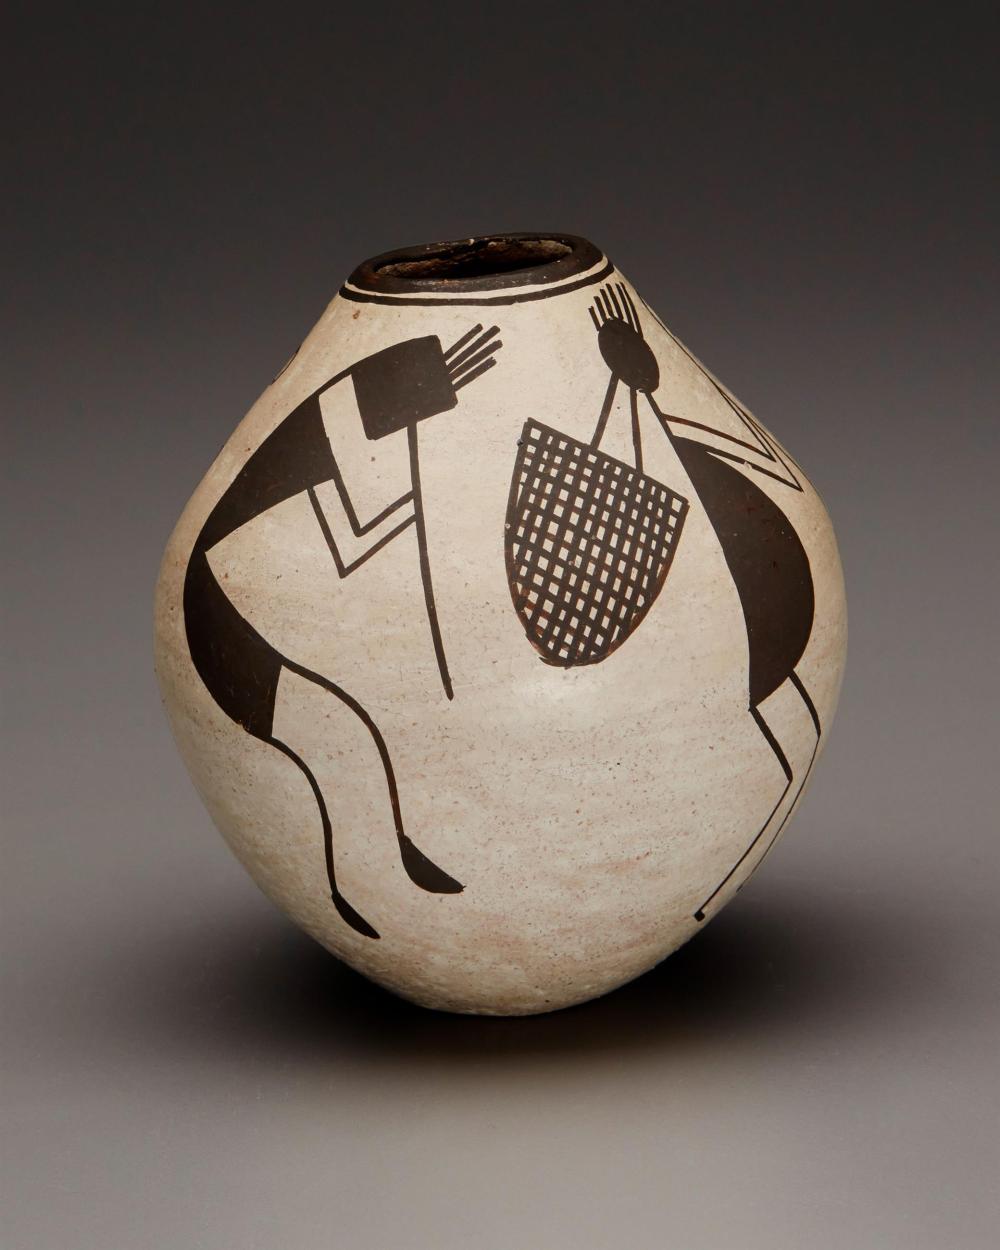 A LUCY LEWIS ACOMA POTTERY VASEA 3446b1